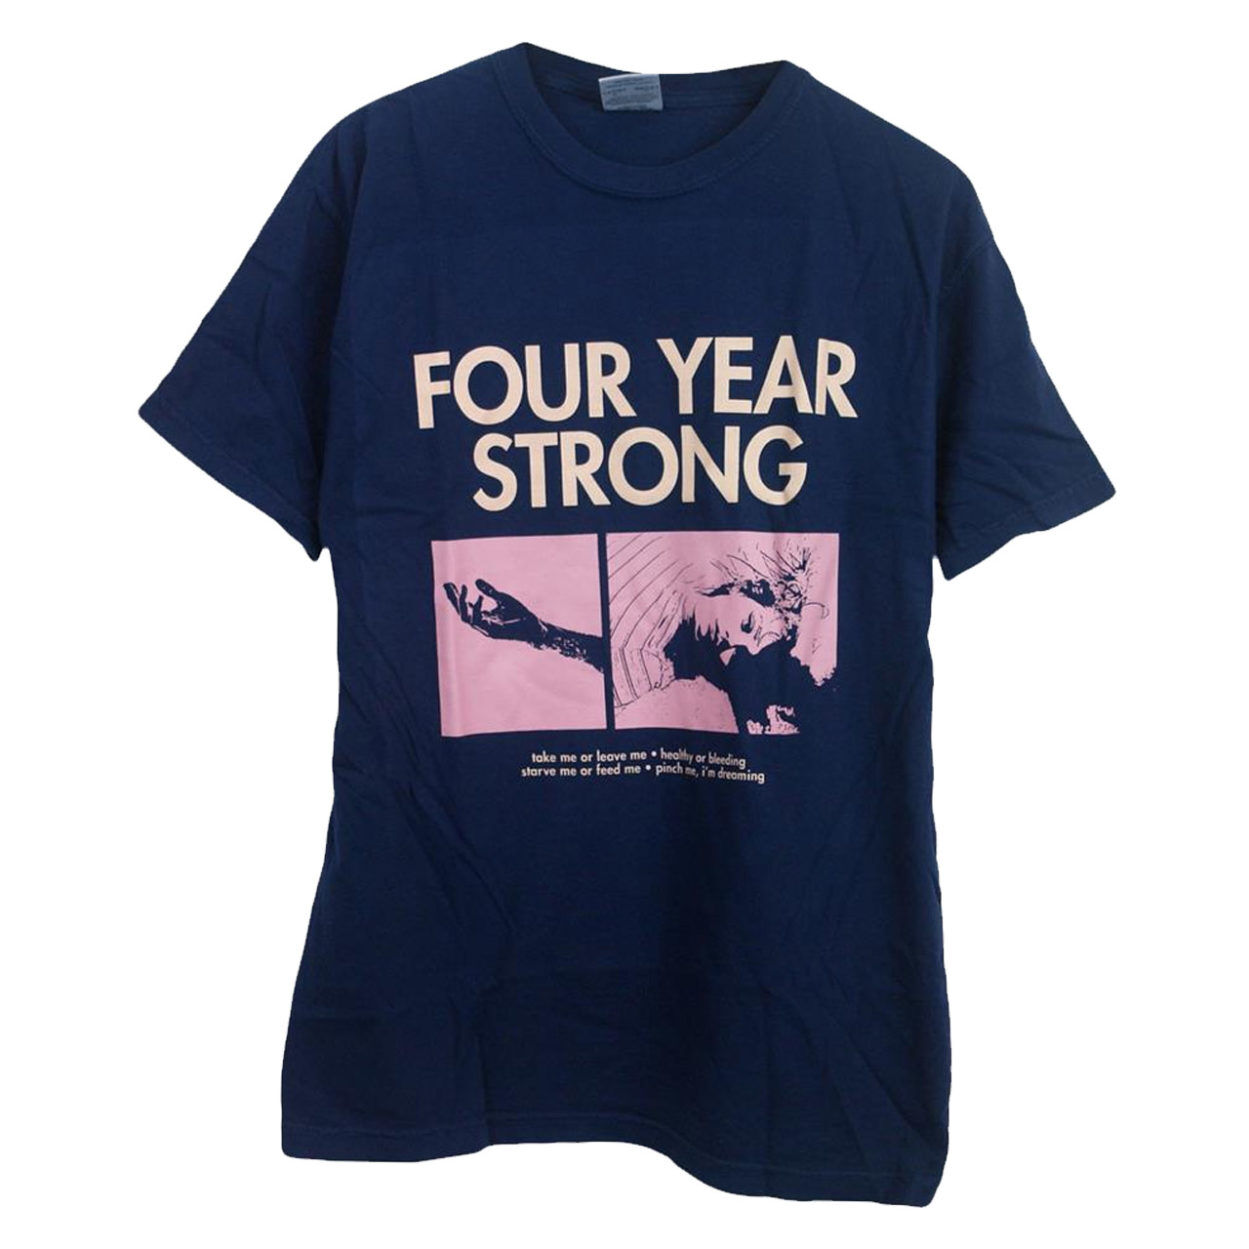 FOUR YEAR STRONG Brain Pain Navy Tshirt Front